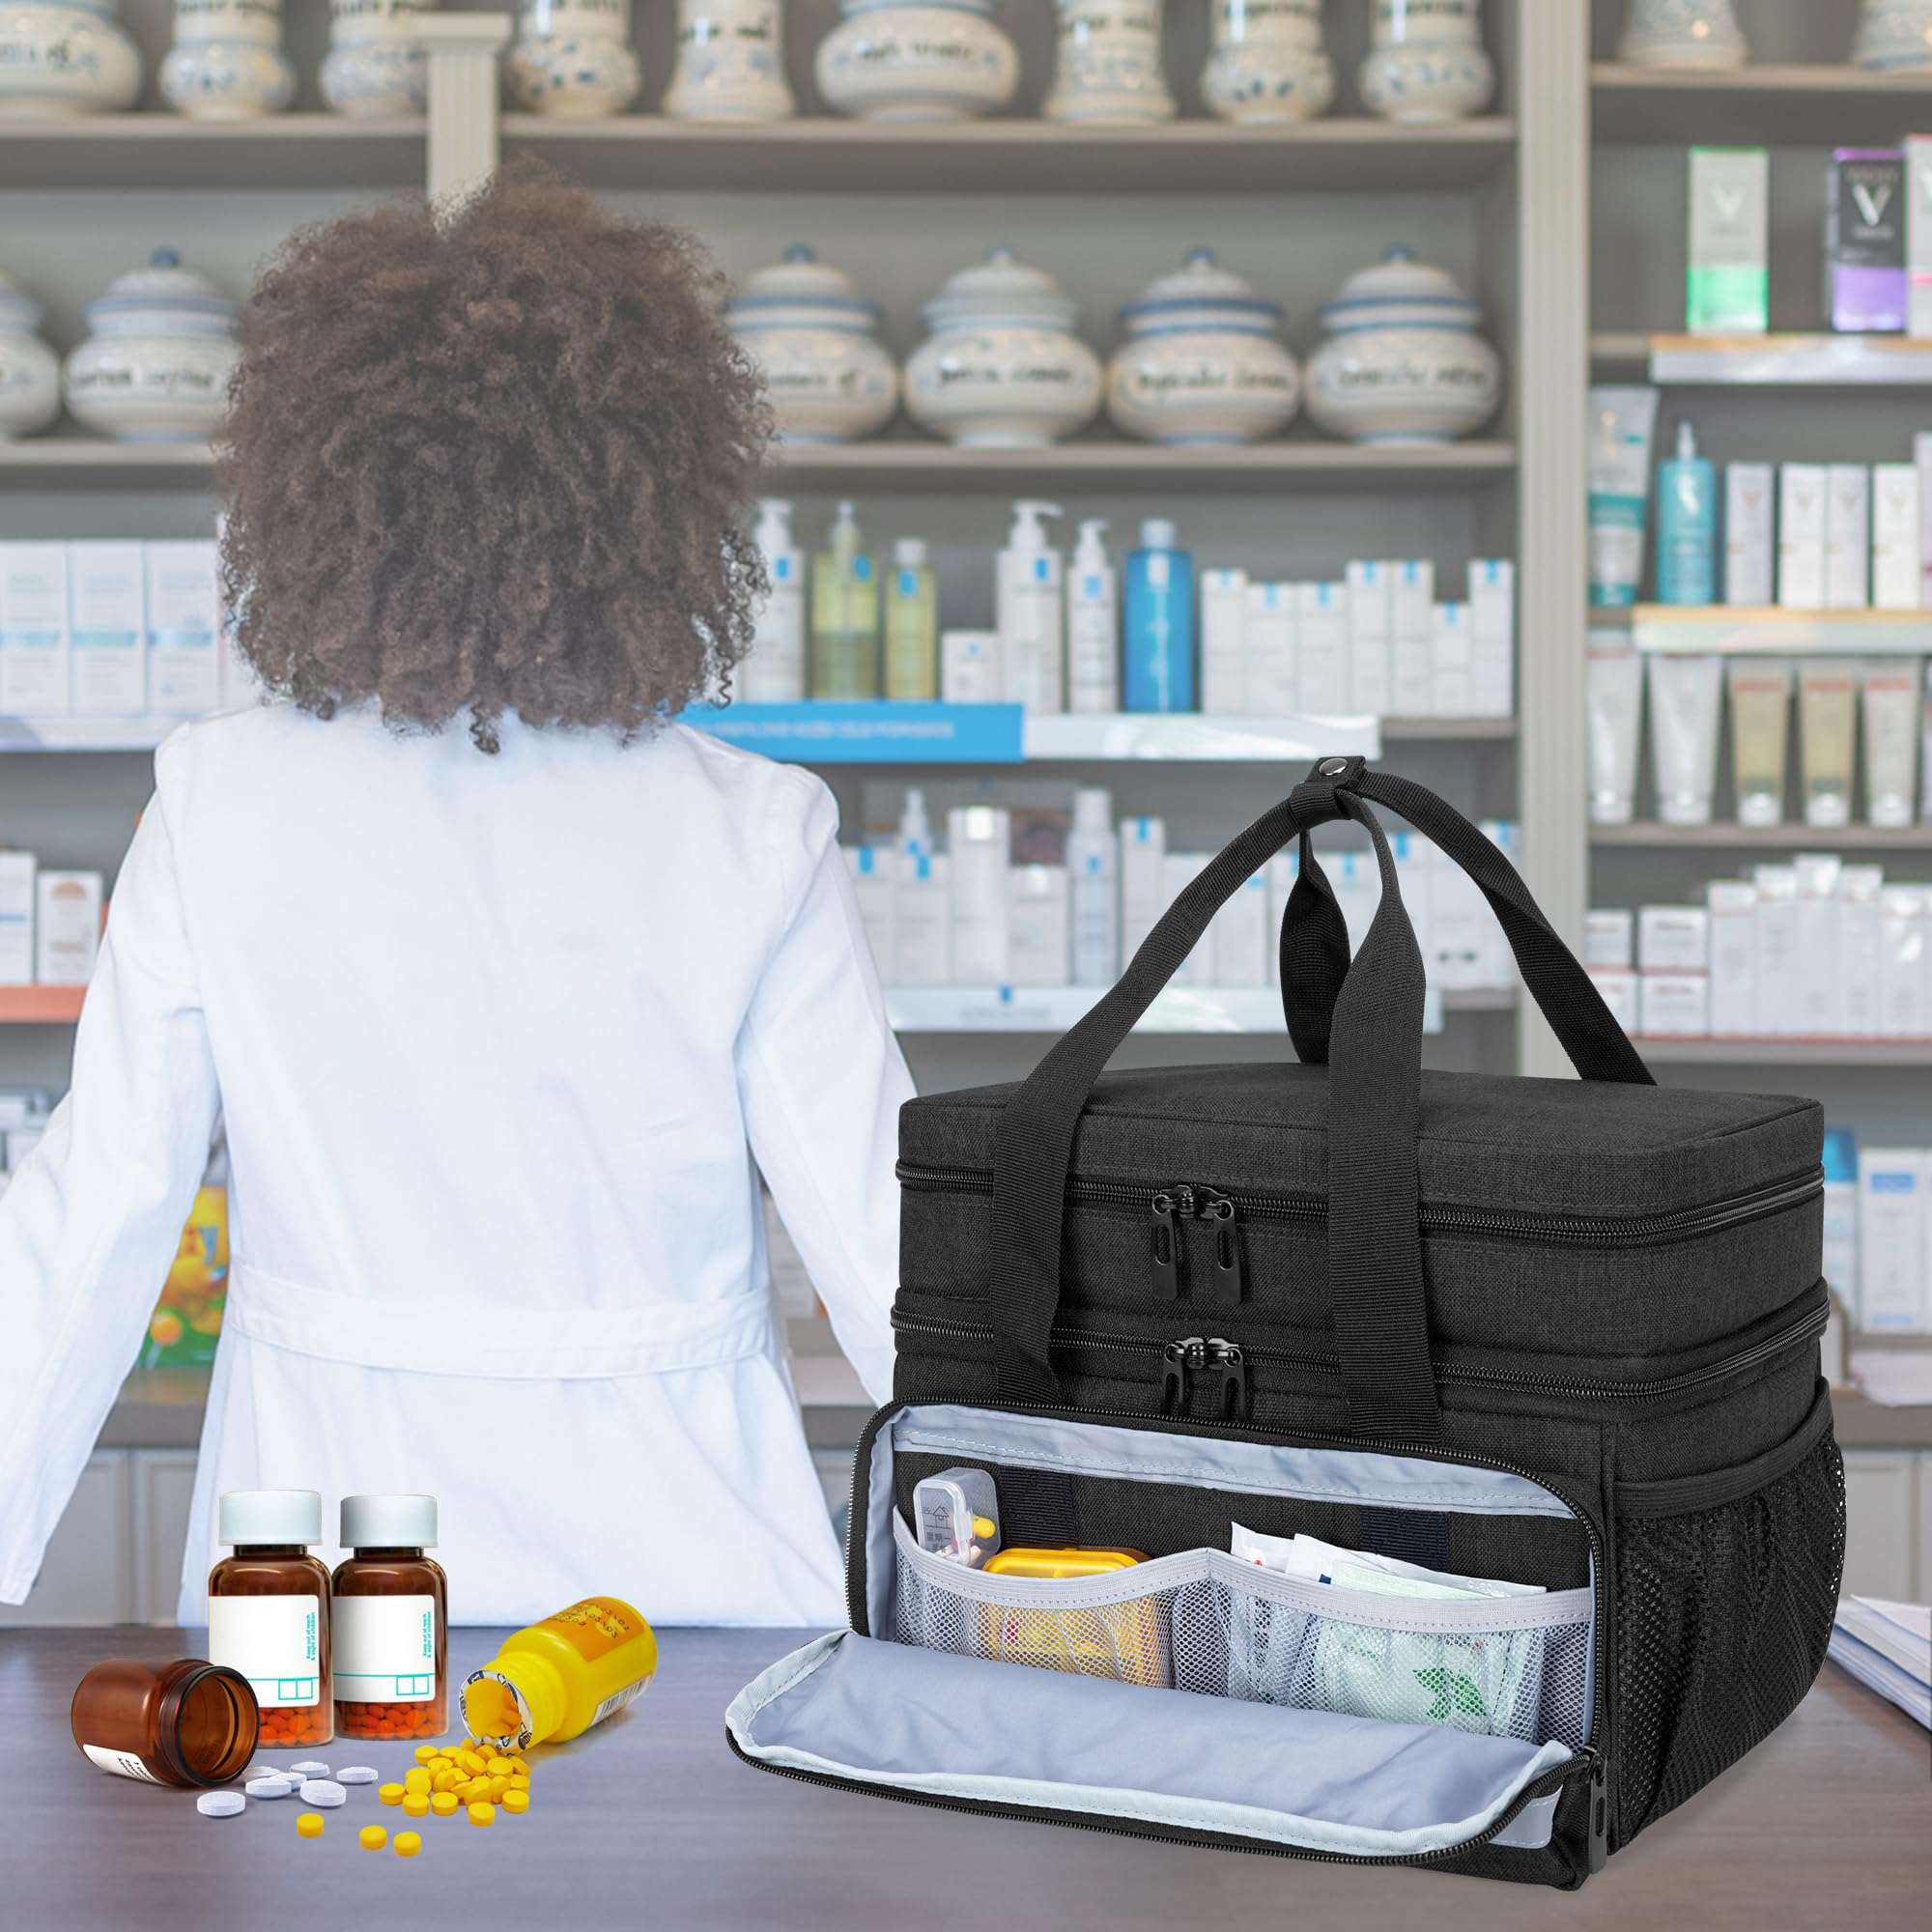 Medicine Organizer and Storage Bag Empty, Family First Aid Box, Pill Bottle  Organizer Bag for Emergency Medication, Supplements or Medical Kits,  Zippered Medicine Bag for Home and Travel(Gray)...price $33.99free for  amazon USA